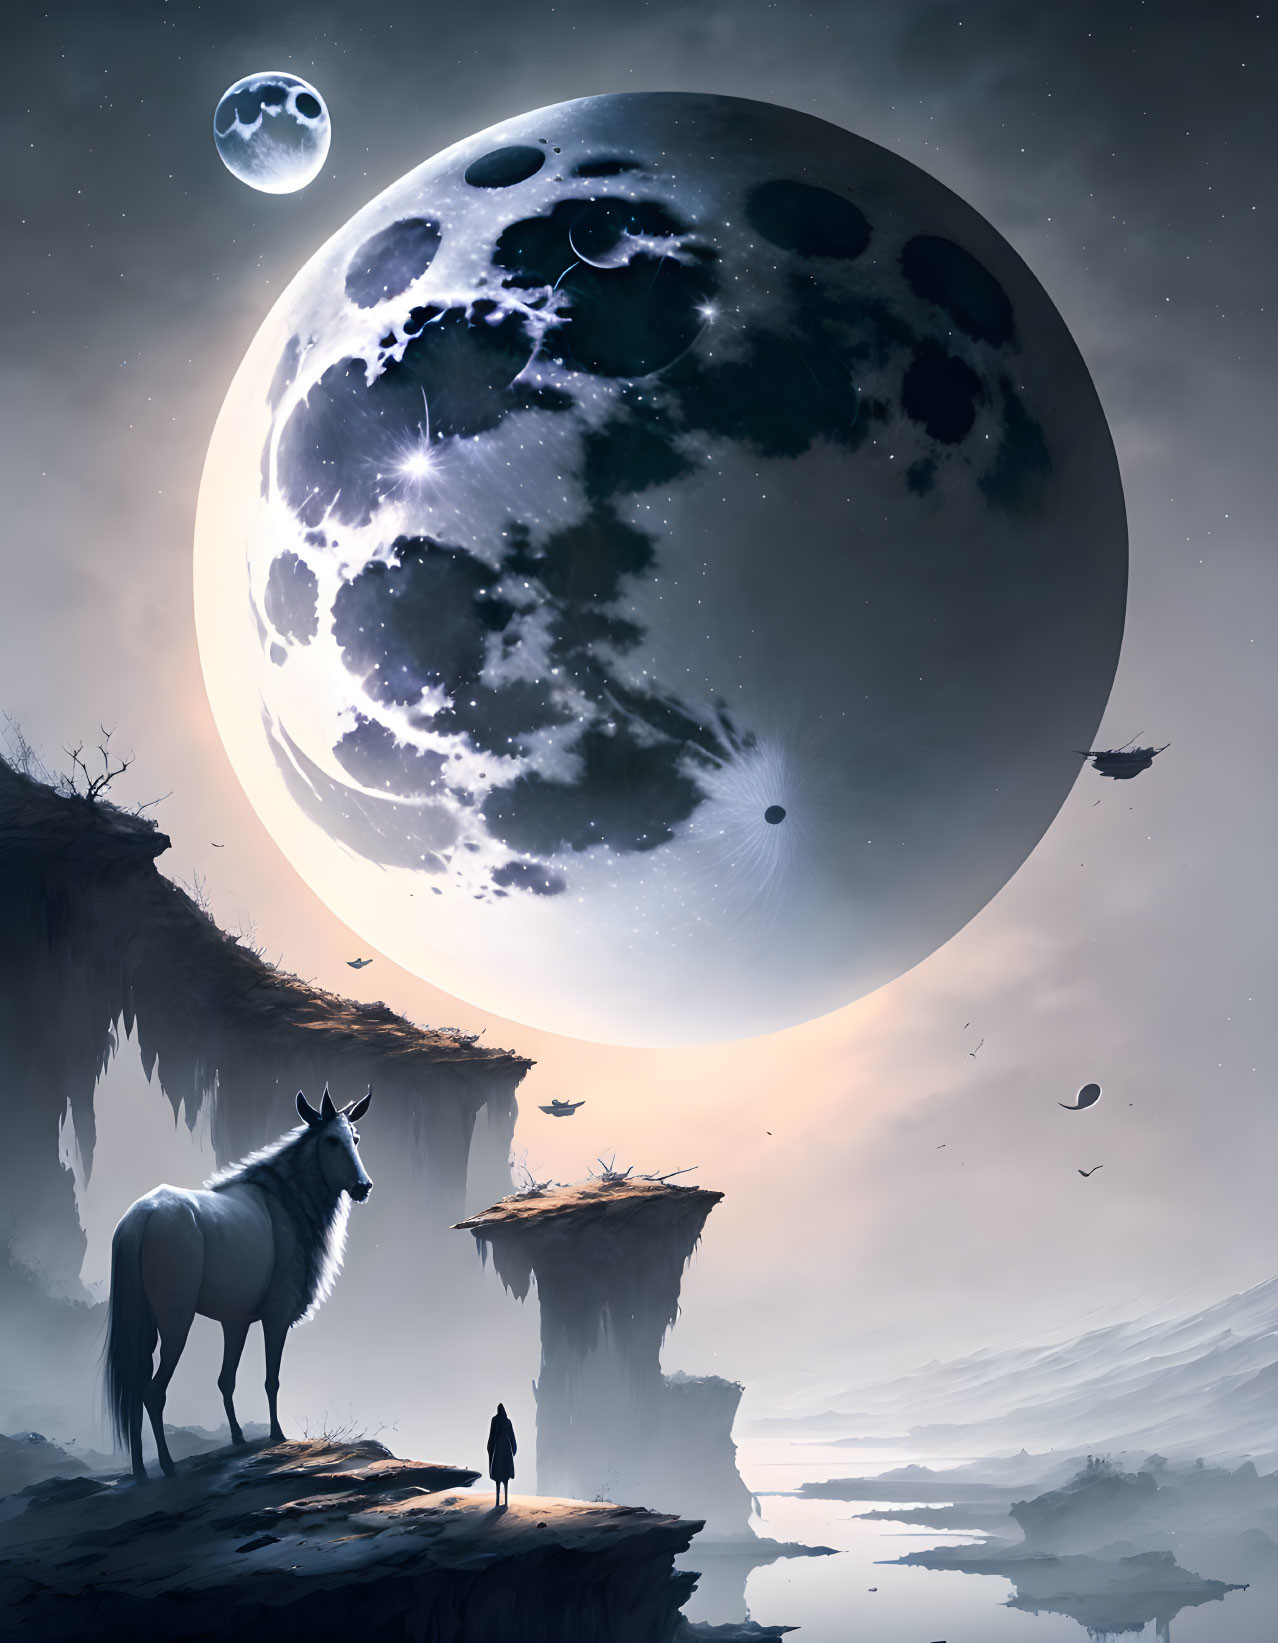 Surreal landscape with horse, person, and gigantic moon on cliff